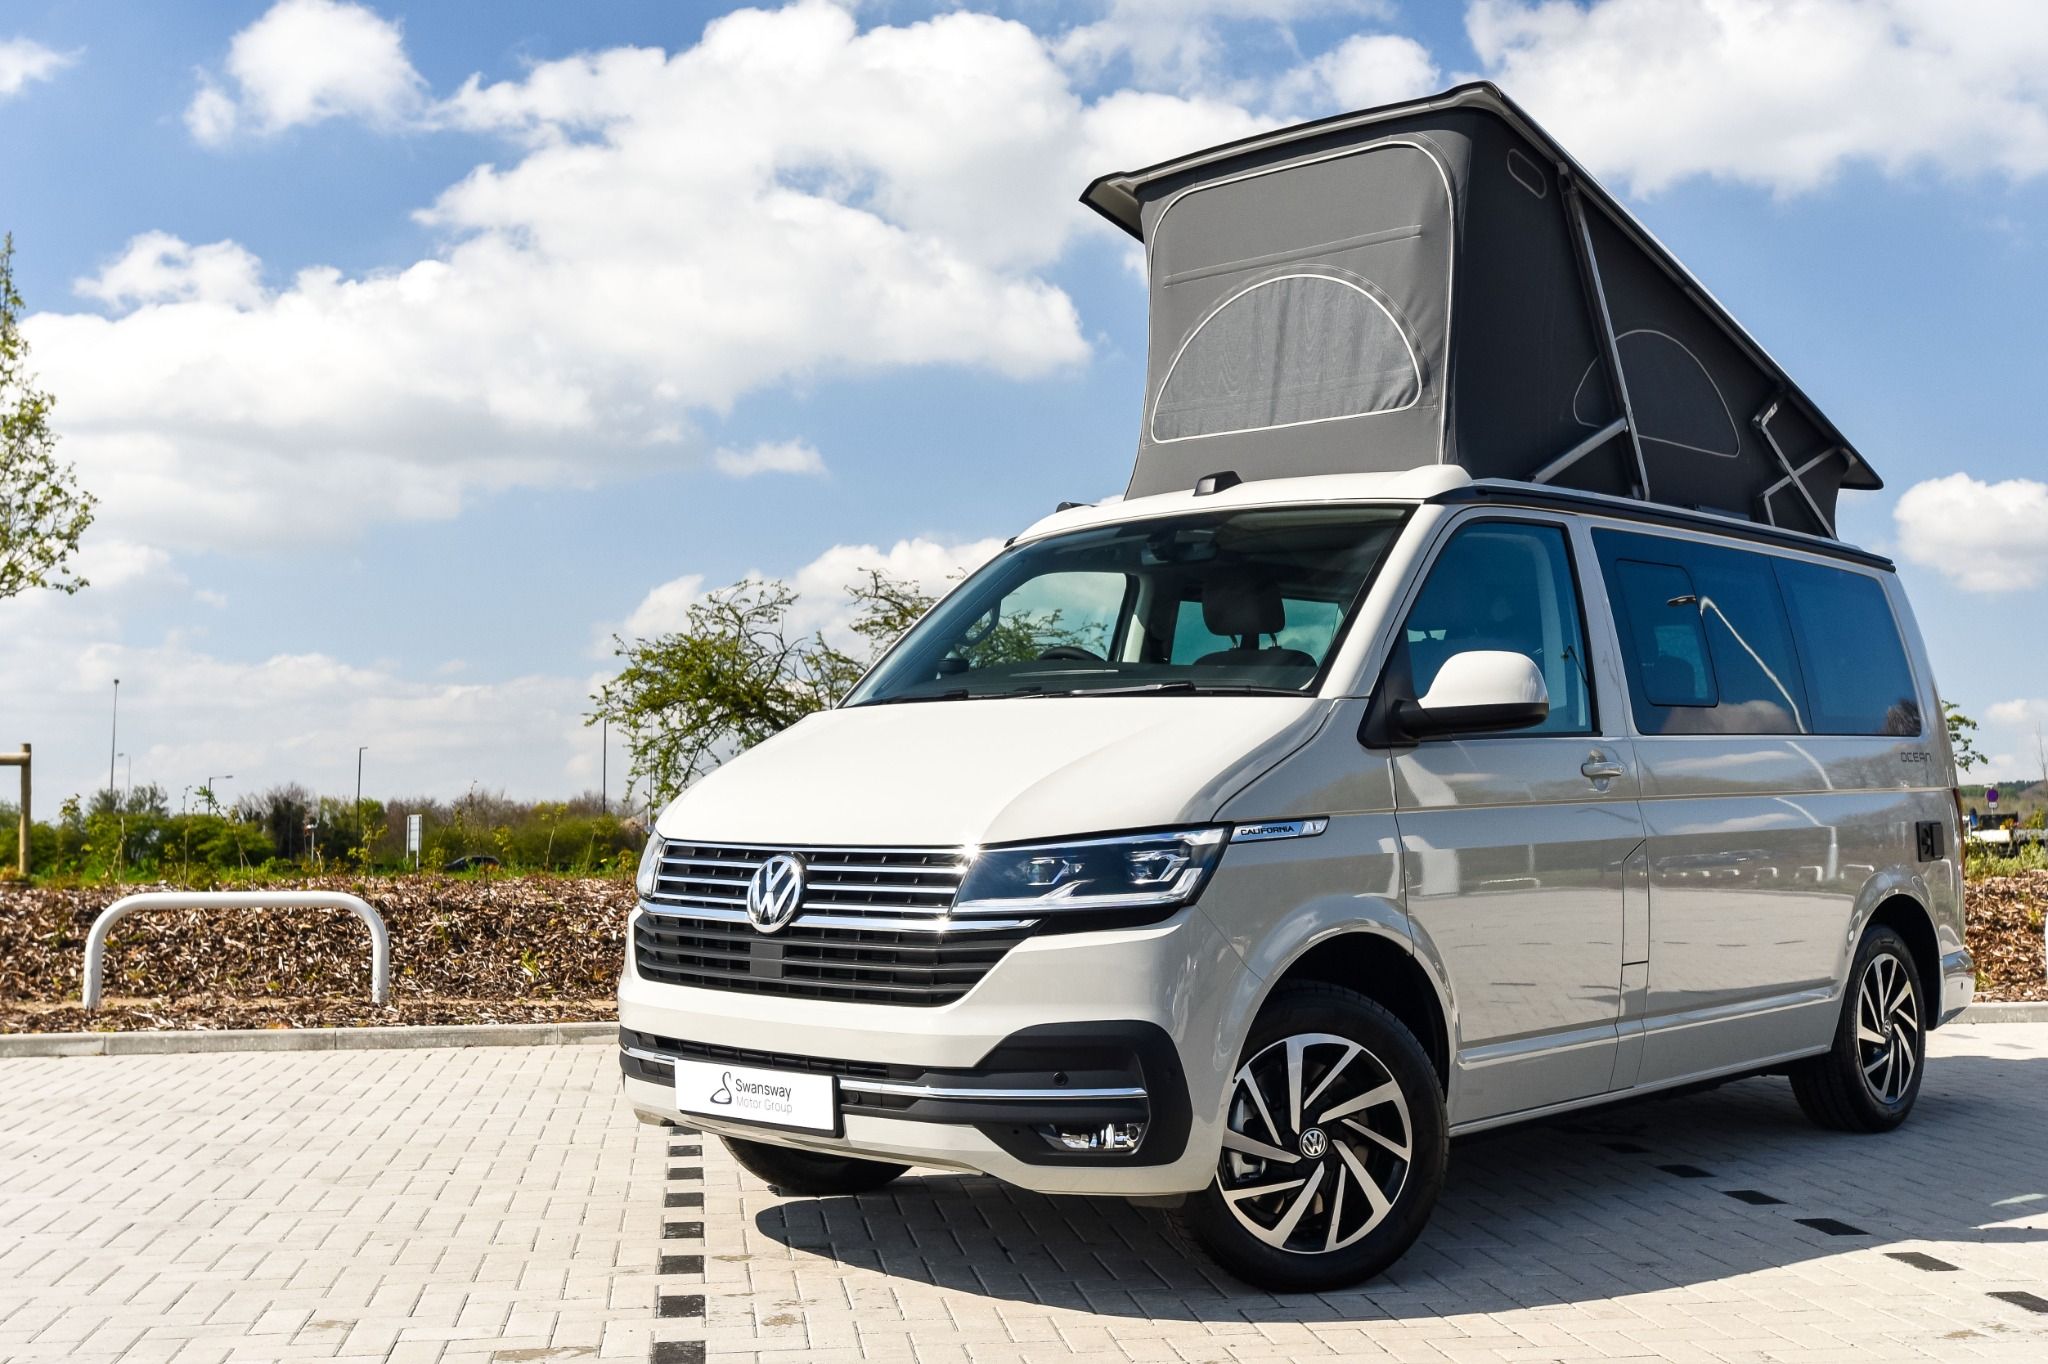 Used Volkswagen California for Sale | Swansway Motor Group